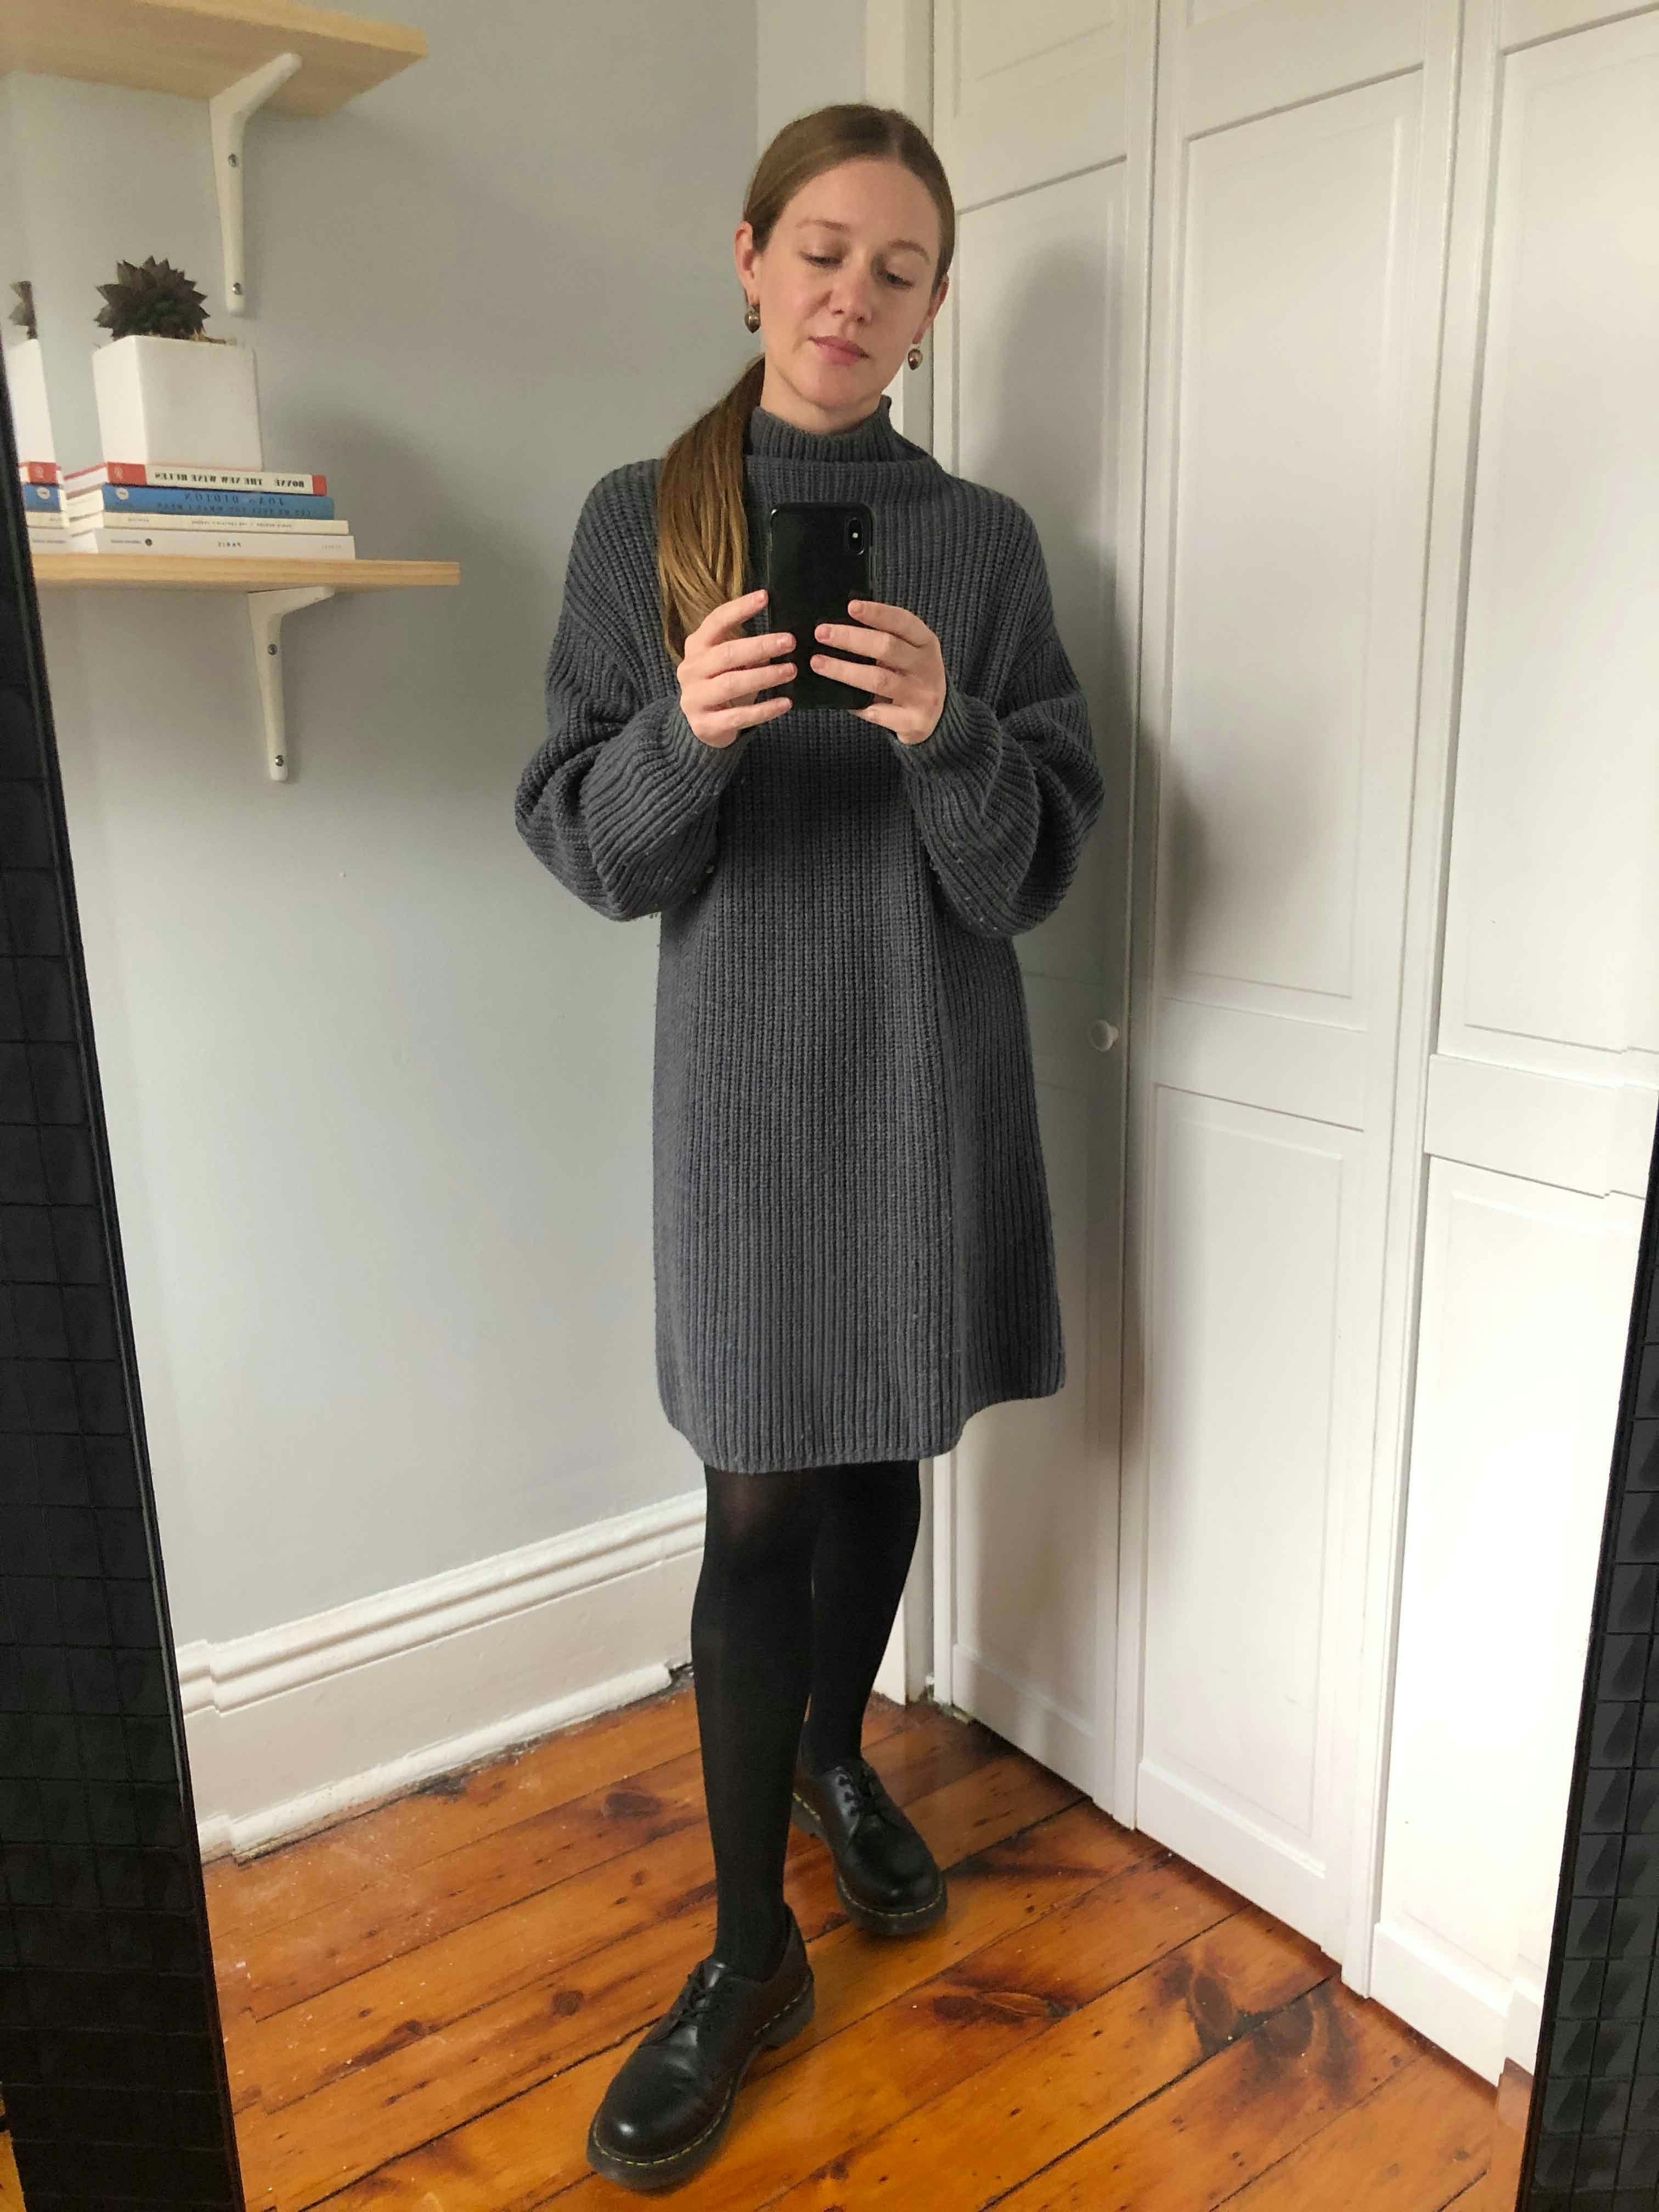 5'1” oversized sweater with a loose French tuck into leggings. Boot socks  to finish it off. : r/PetiteFashionAdvice